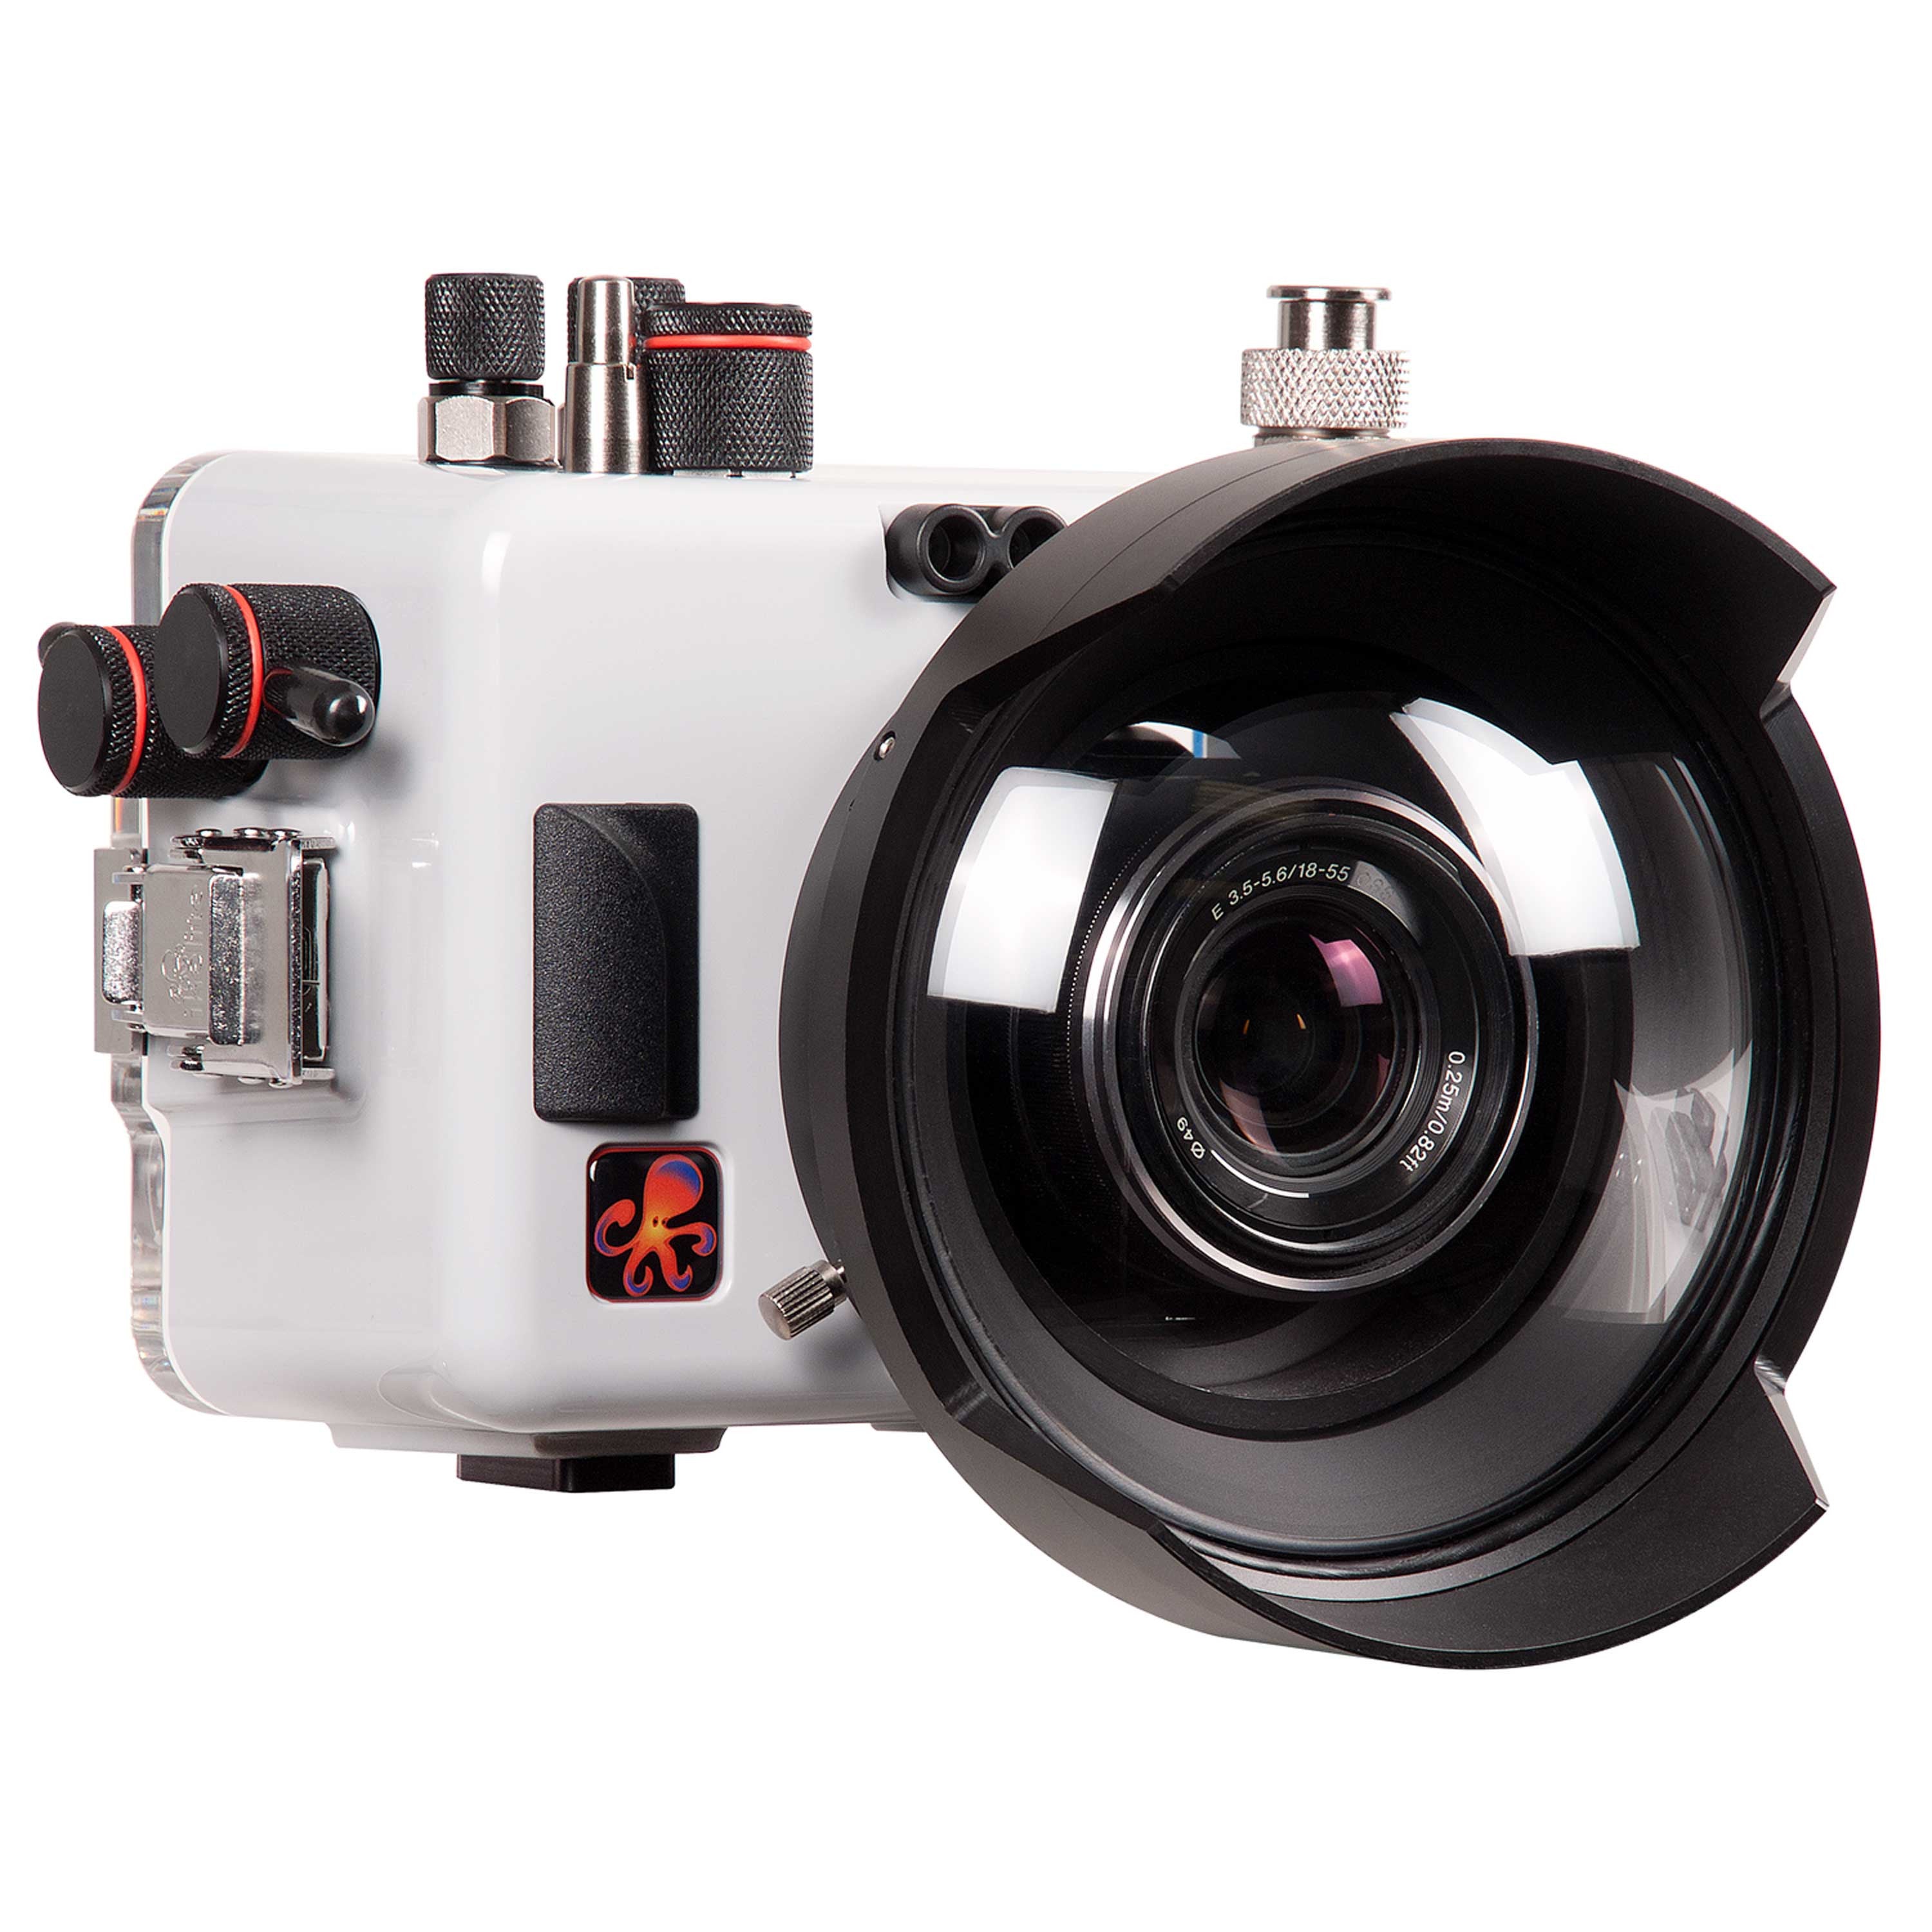 200DLM/A Underwater TTL Housing for Sony Alpha A6000